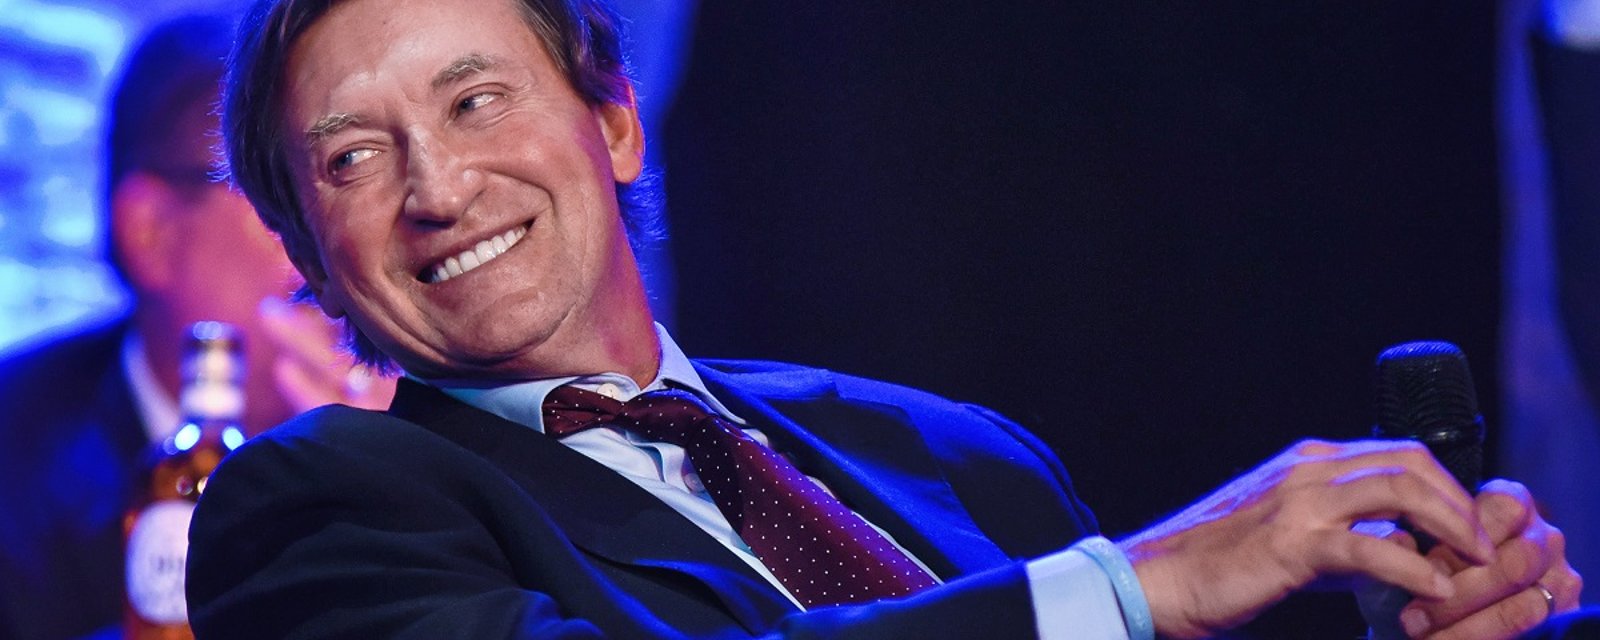 Wayne Gretzky names 3 cities that deserve an NHL expansion team.